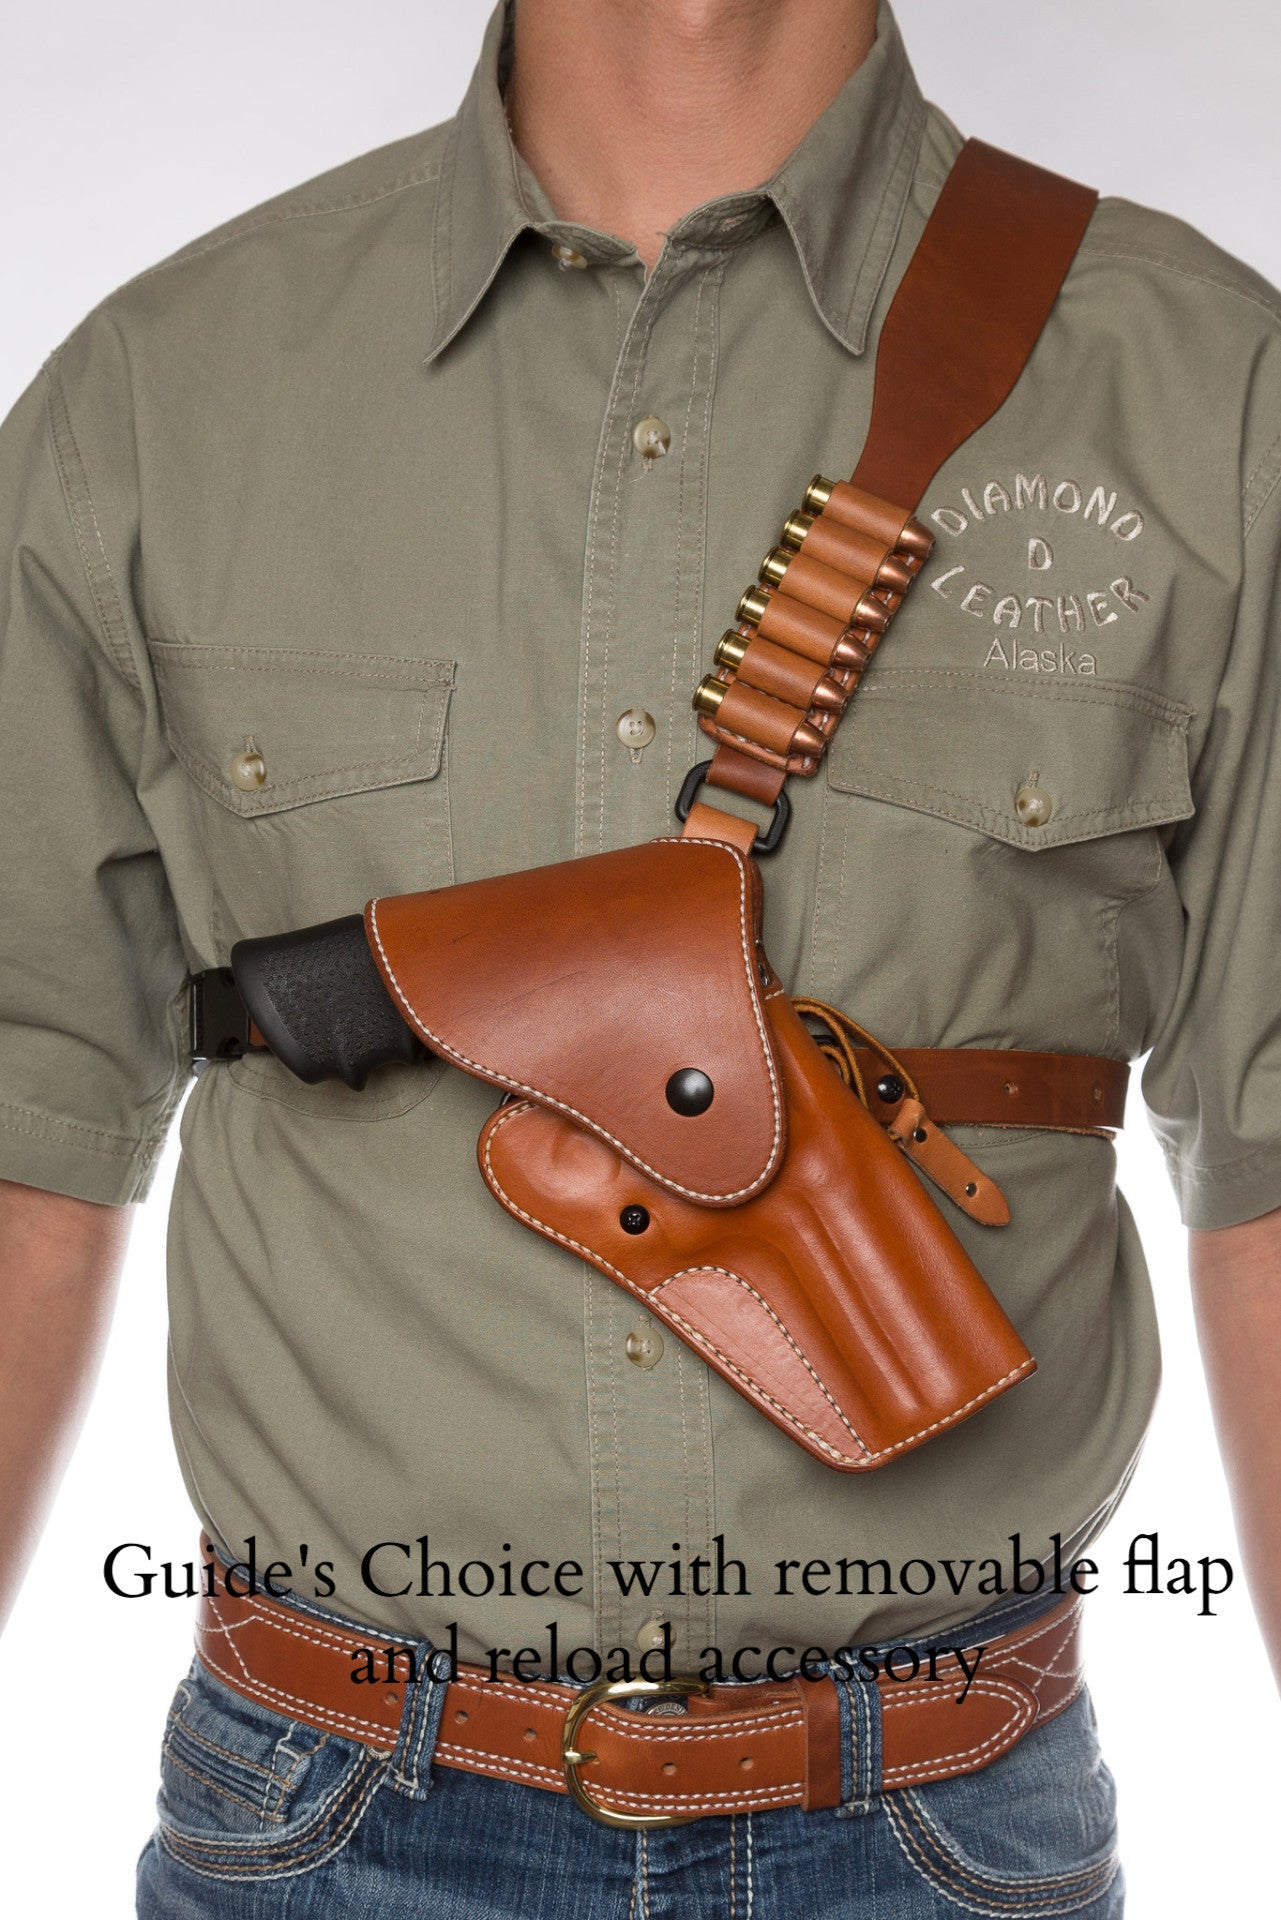 Guides Choice™ Leather Chest Holster The Ultimate Outdoor Gun Holster 